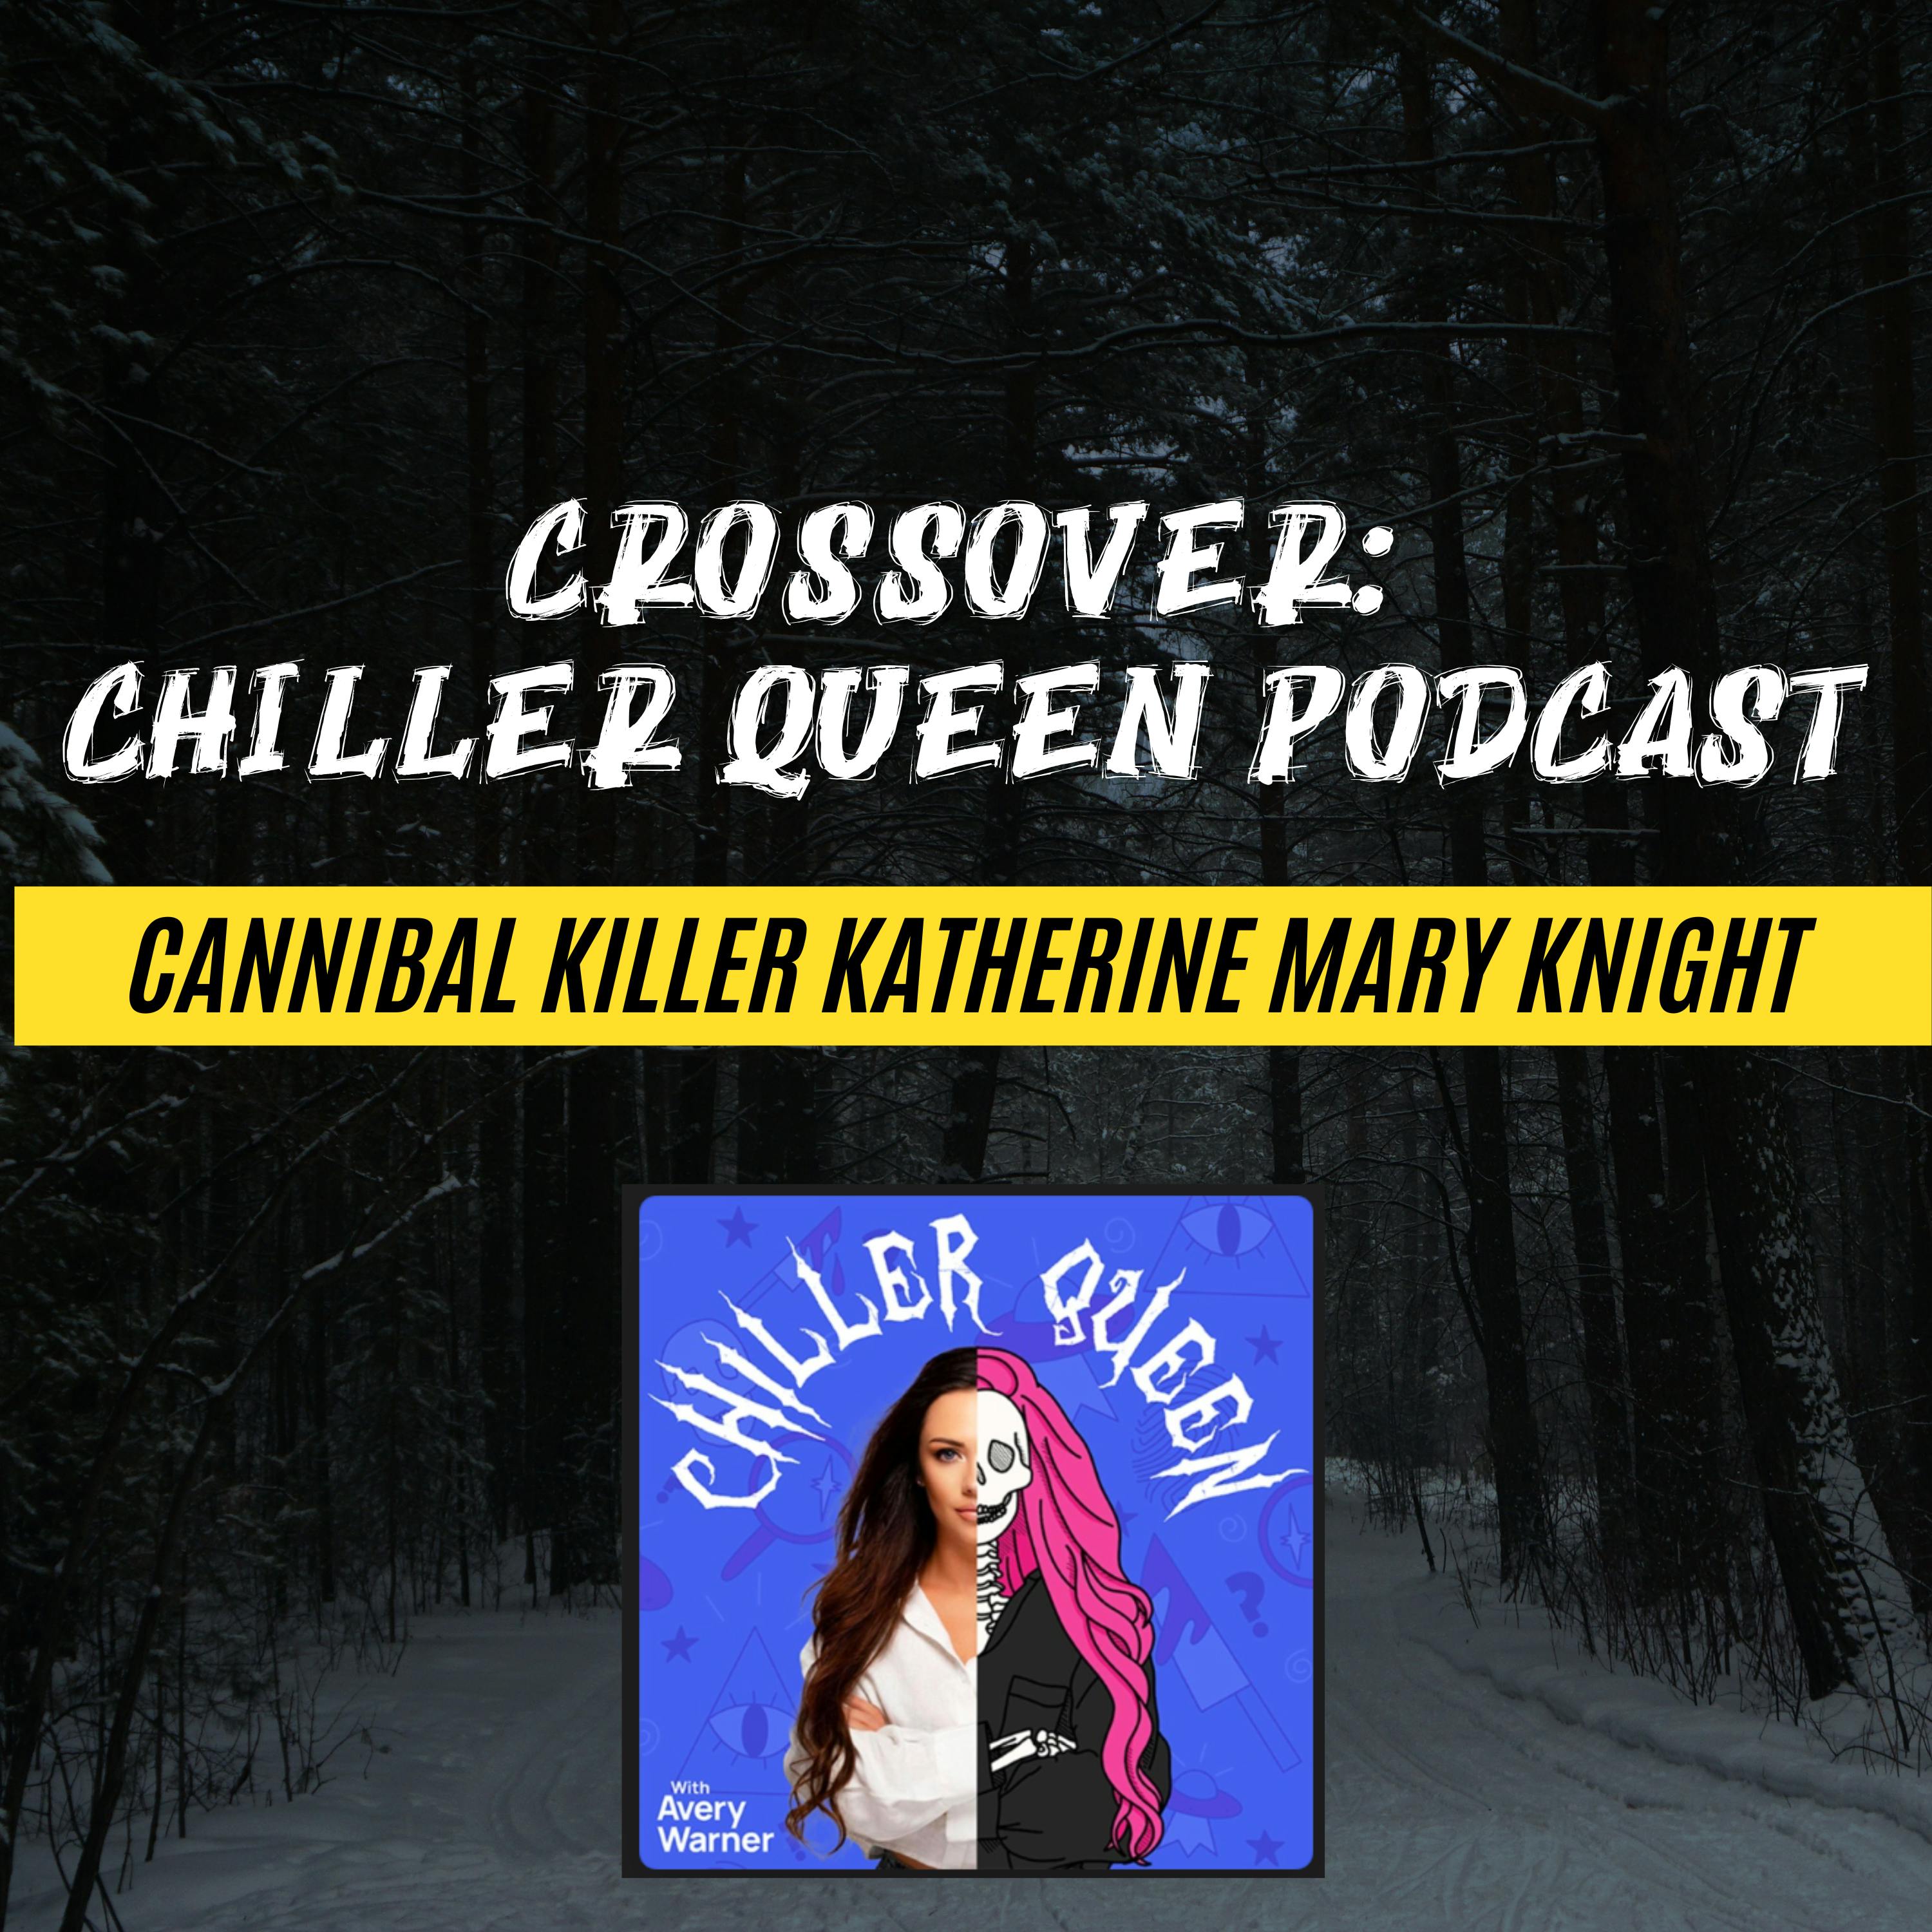 CROSSOVER: Chiller Queen Podcast - "Children, dinner's ready" (Cannibal Killer Katherine Mary Knight) Image